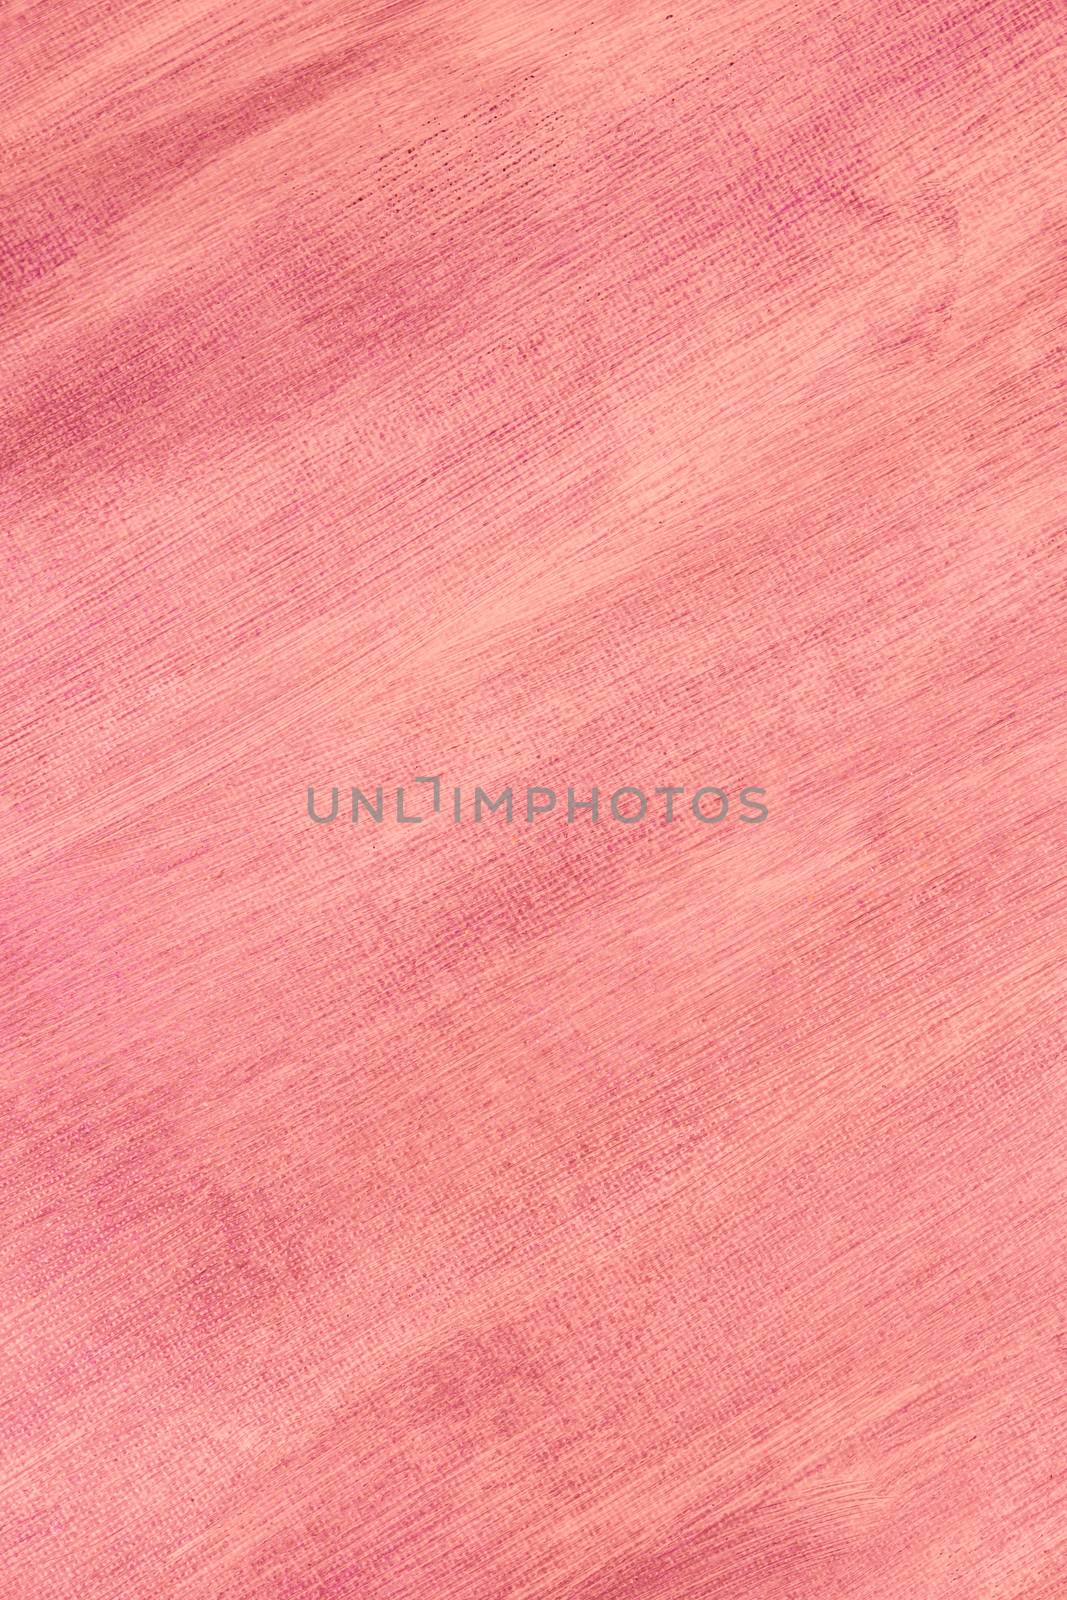 Abstract hand painted pink canvas background texture. 